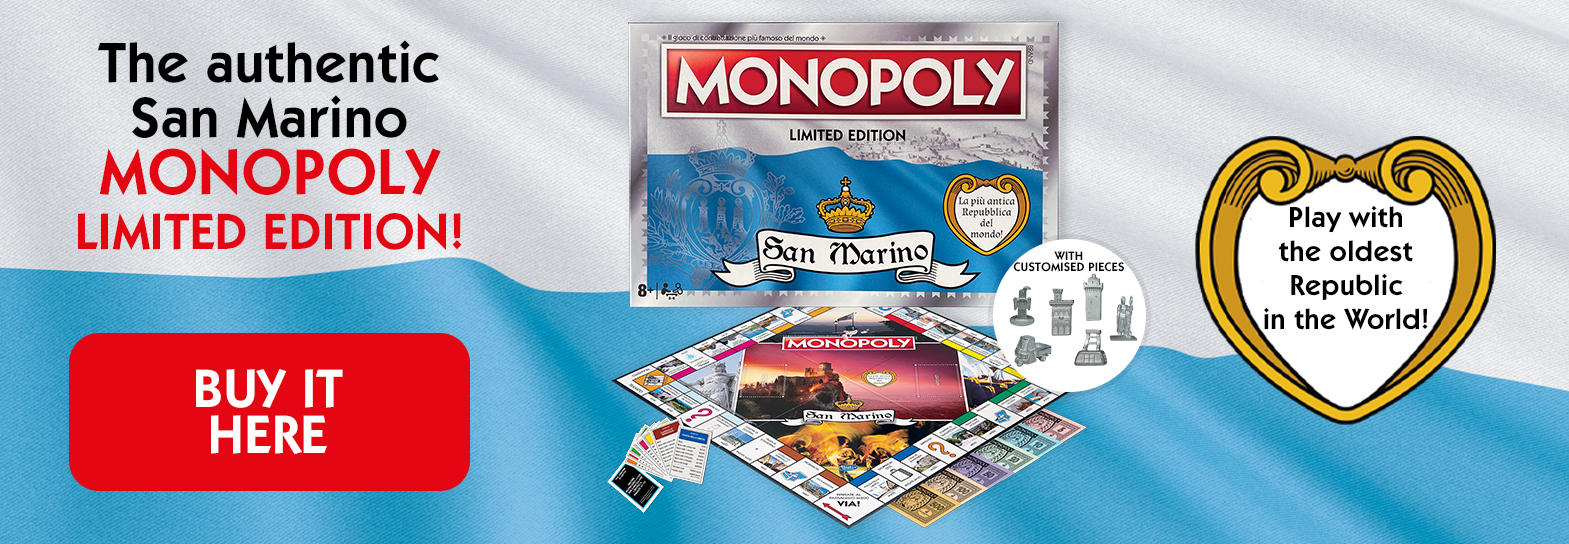 monopoly-generico-banner-sito-eng